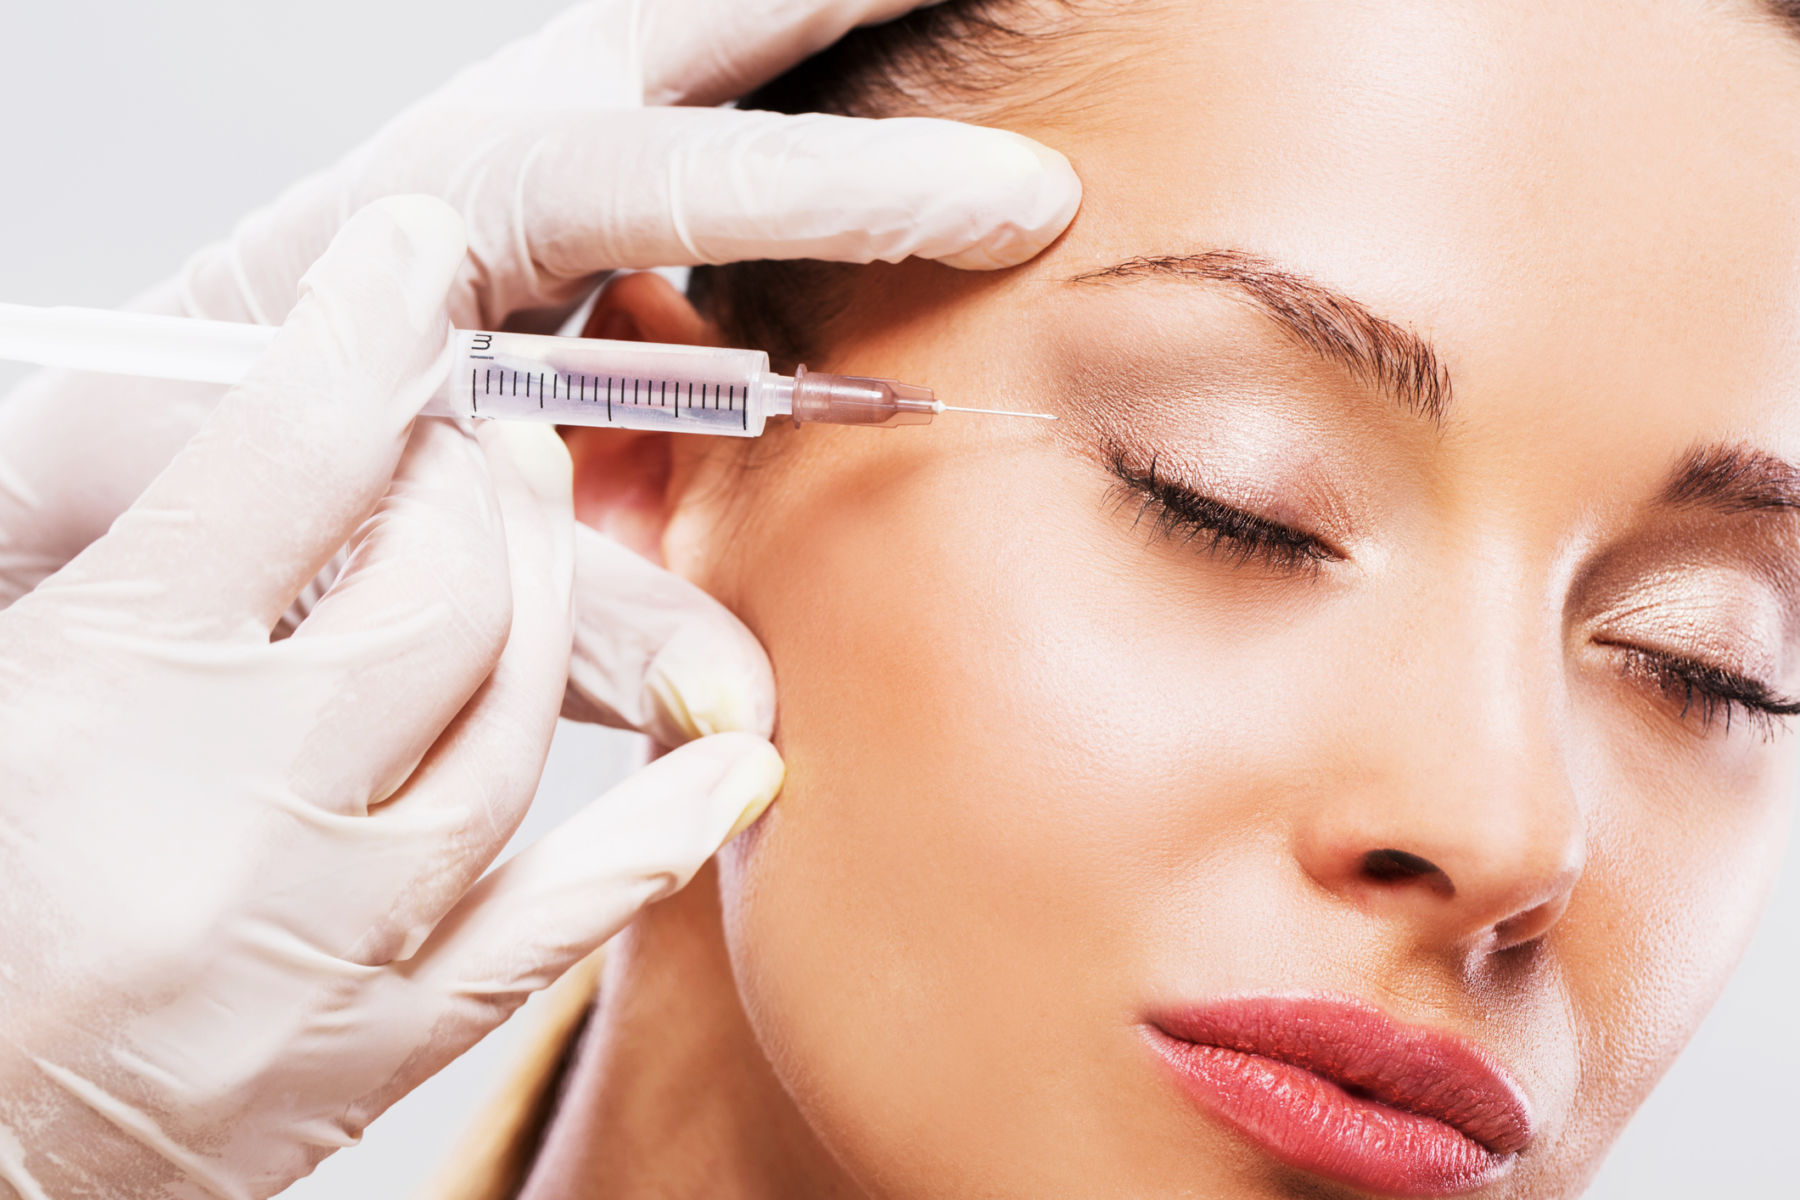 Forget Buccal Fat Removal: Start With BOTOX® for Face Slimming